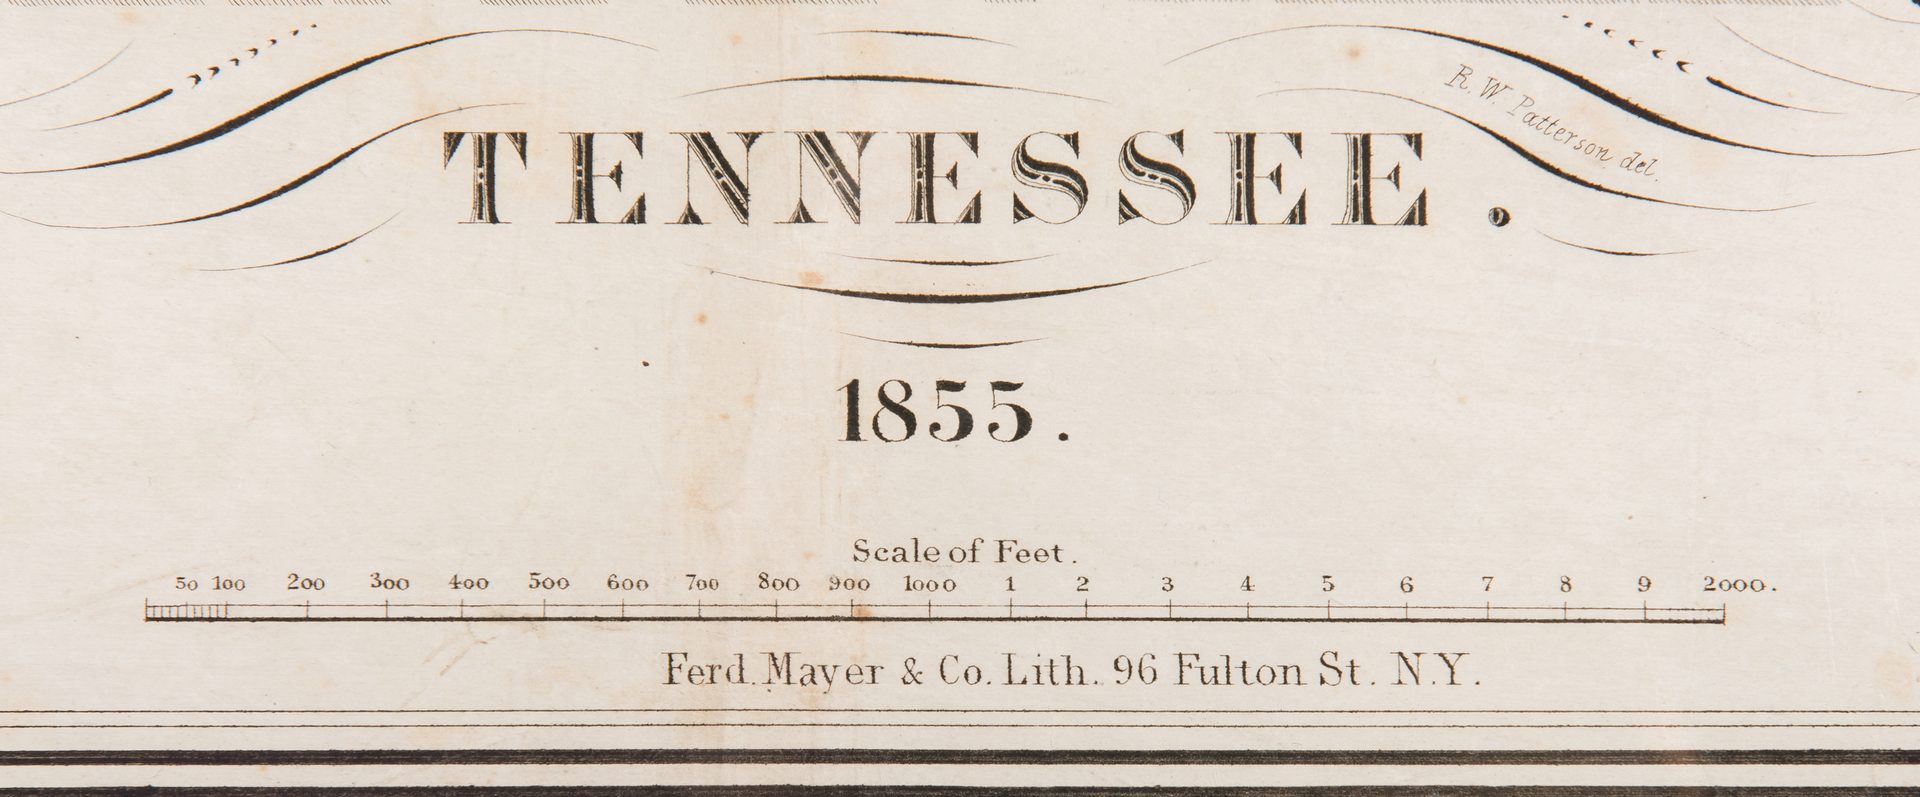 Lot 279: Rare Lea 1855 Plan of Knoxville Map